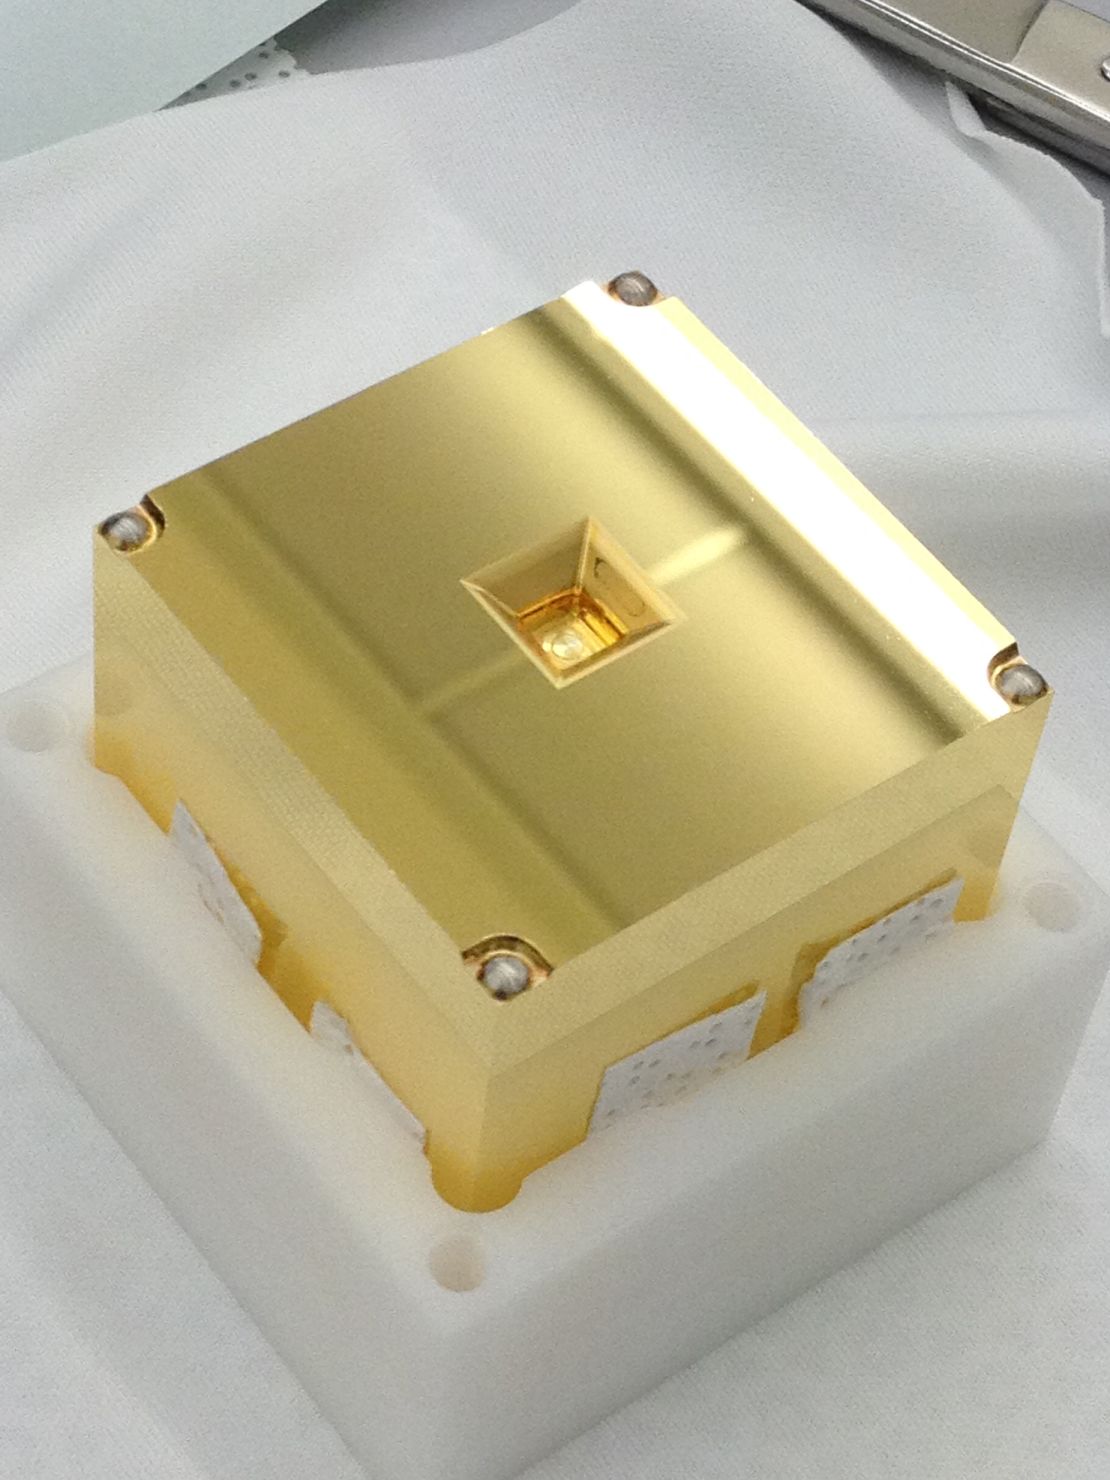 Gold cubes inside each spacecraft will help the LISA mission detect gravitational waves.